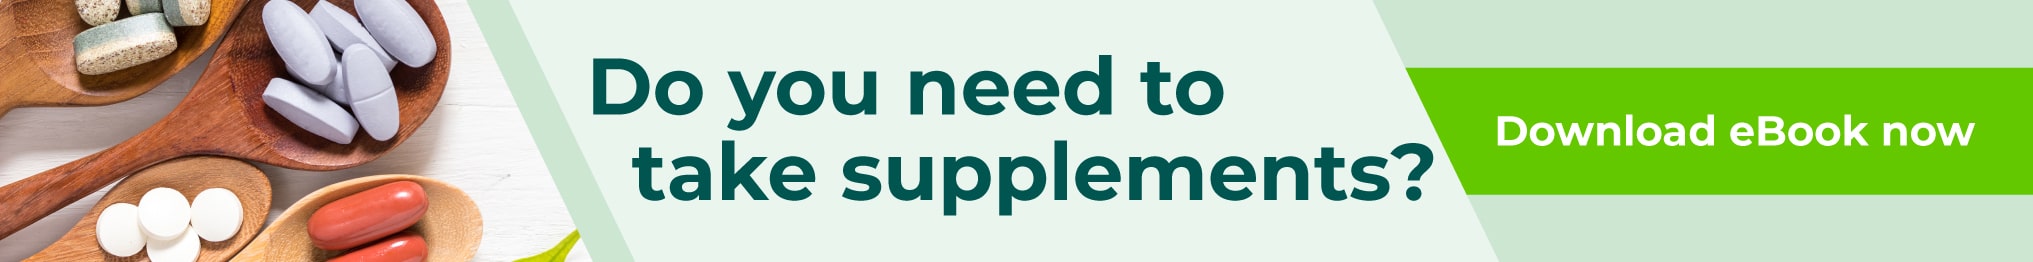 Do you need to take supplements guide